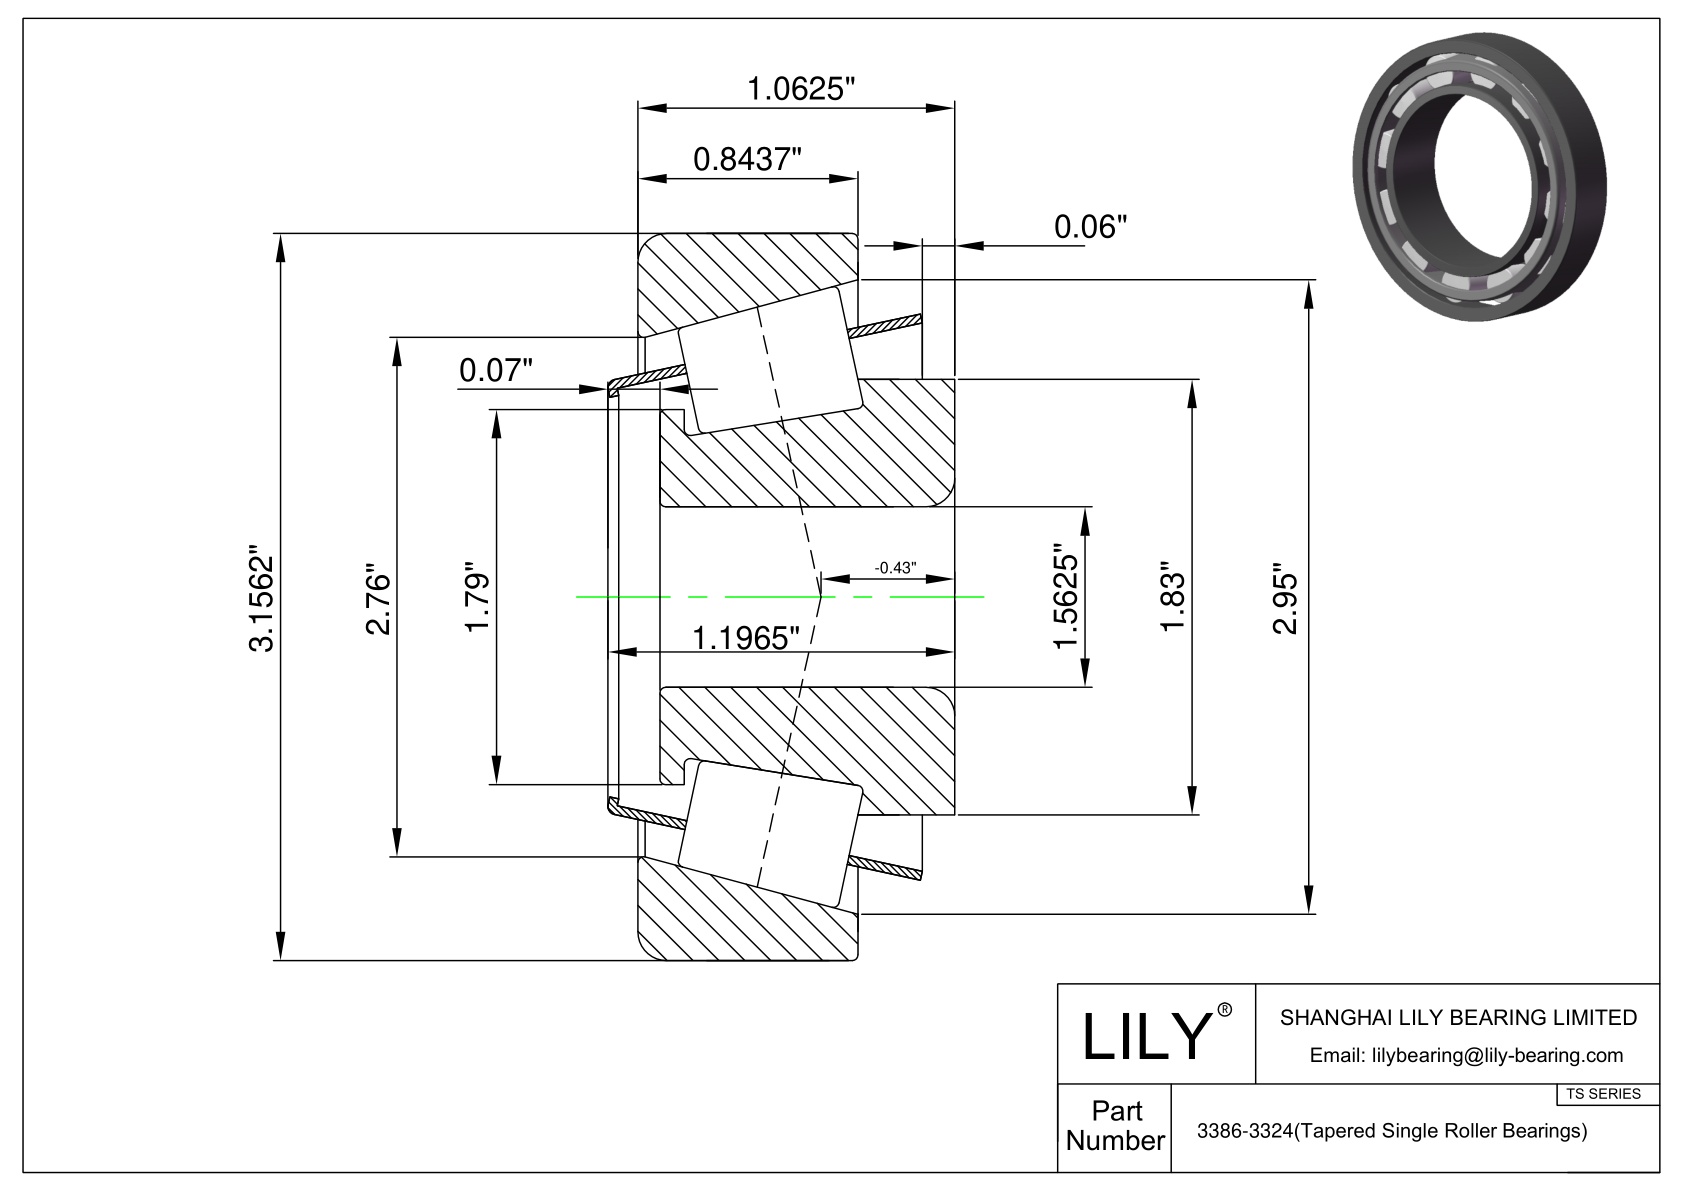 3386-3324 TS (Tapered Single Roller Bearings) (Imperial) cad drawing